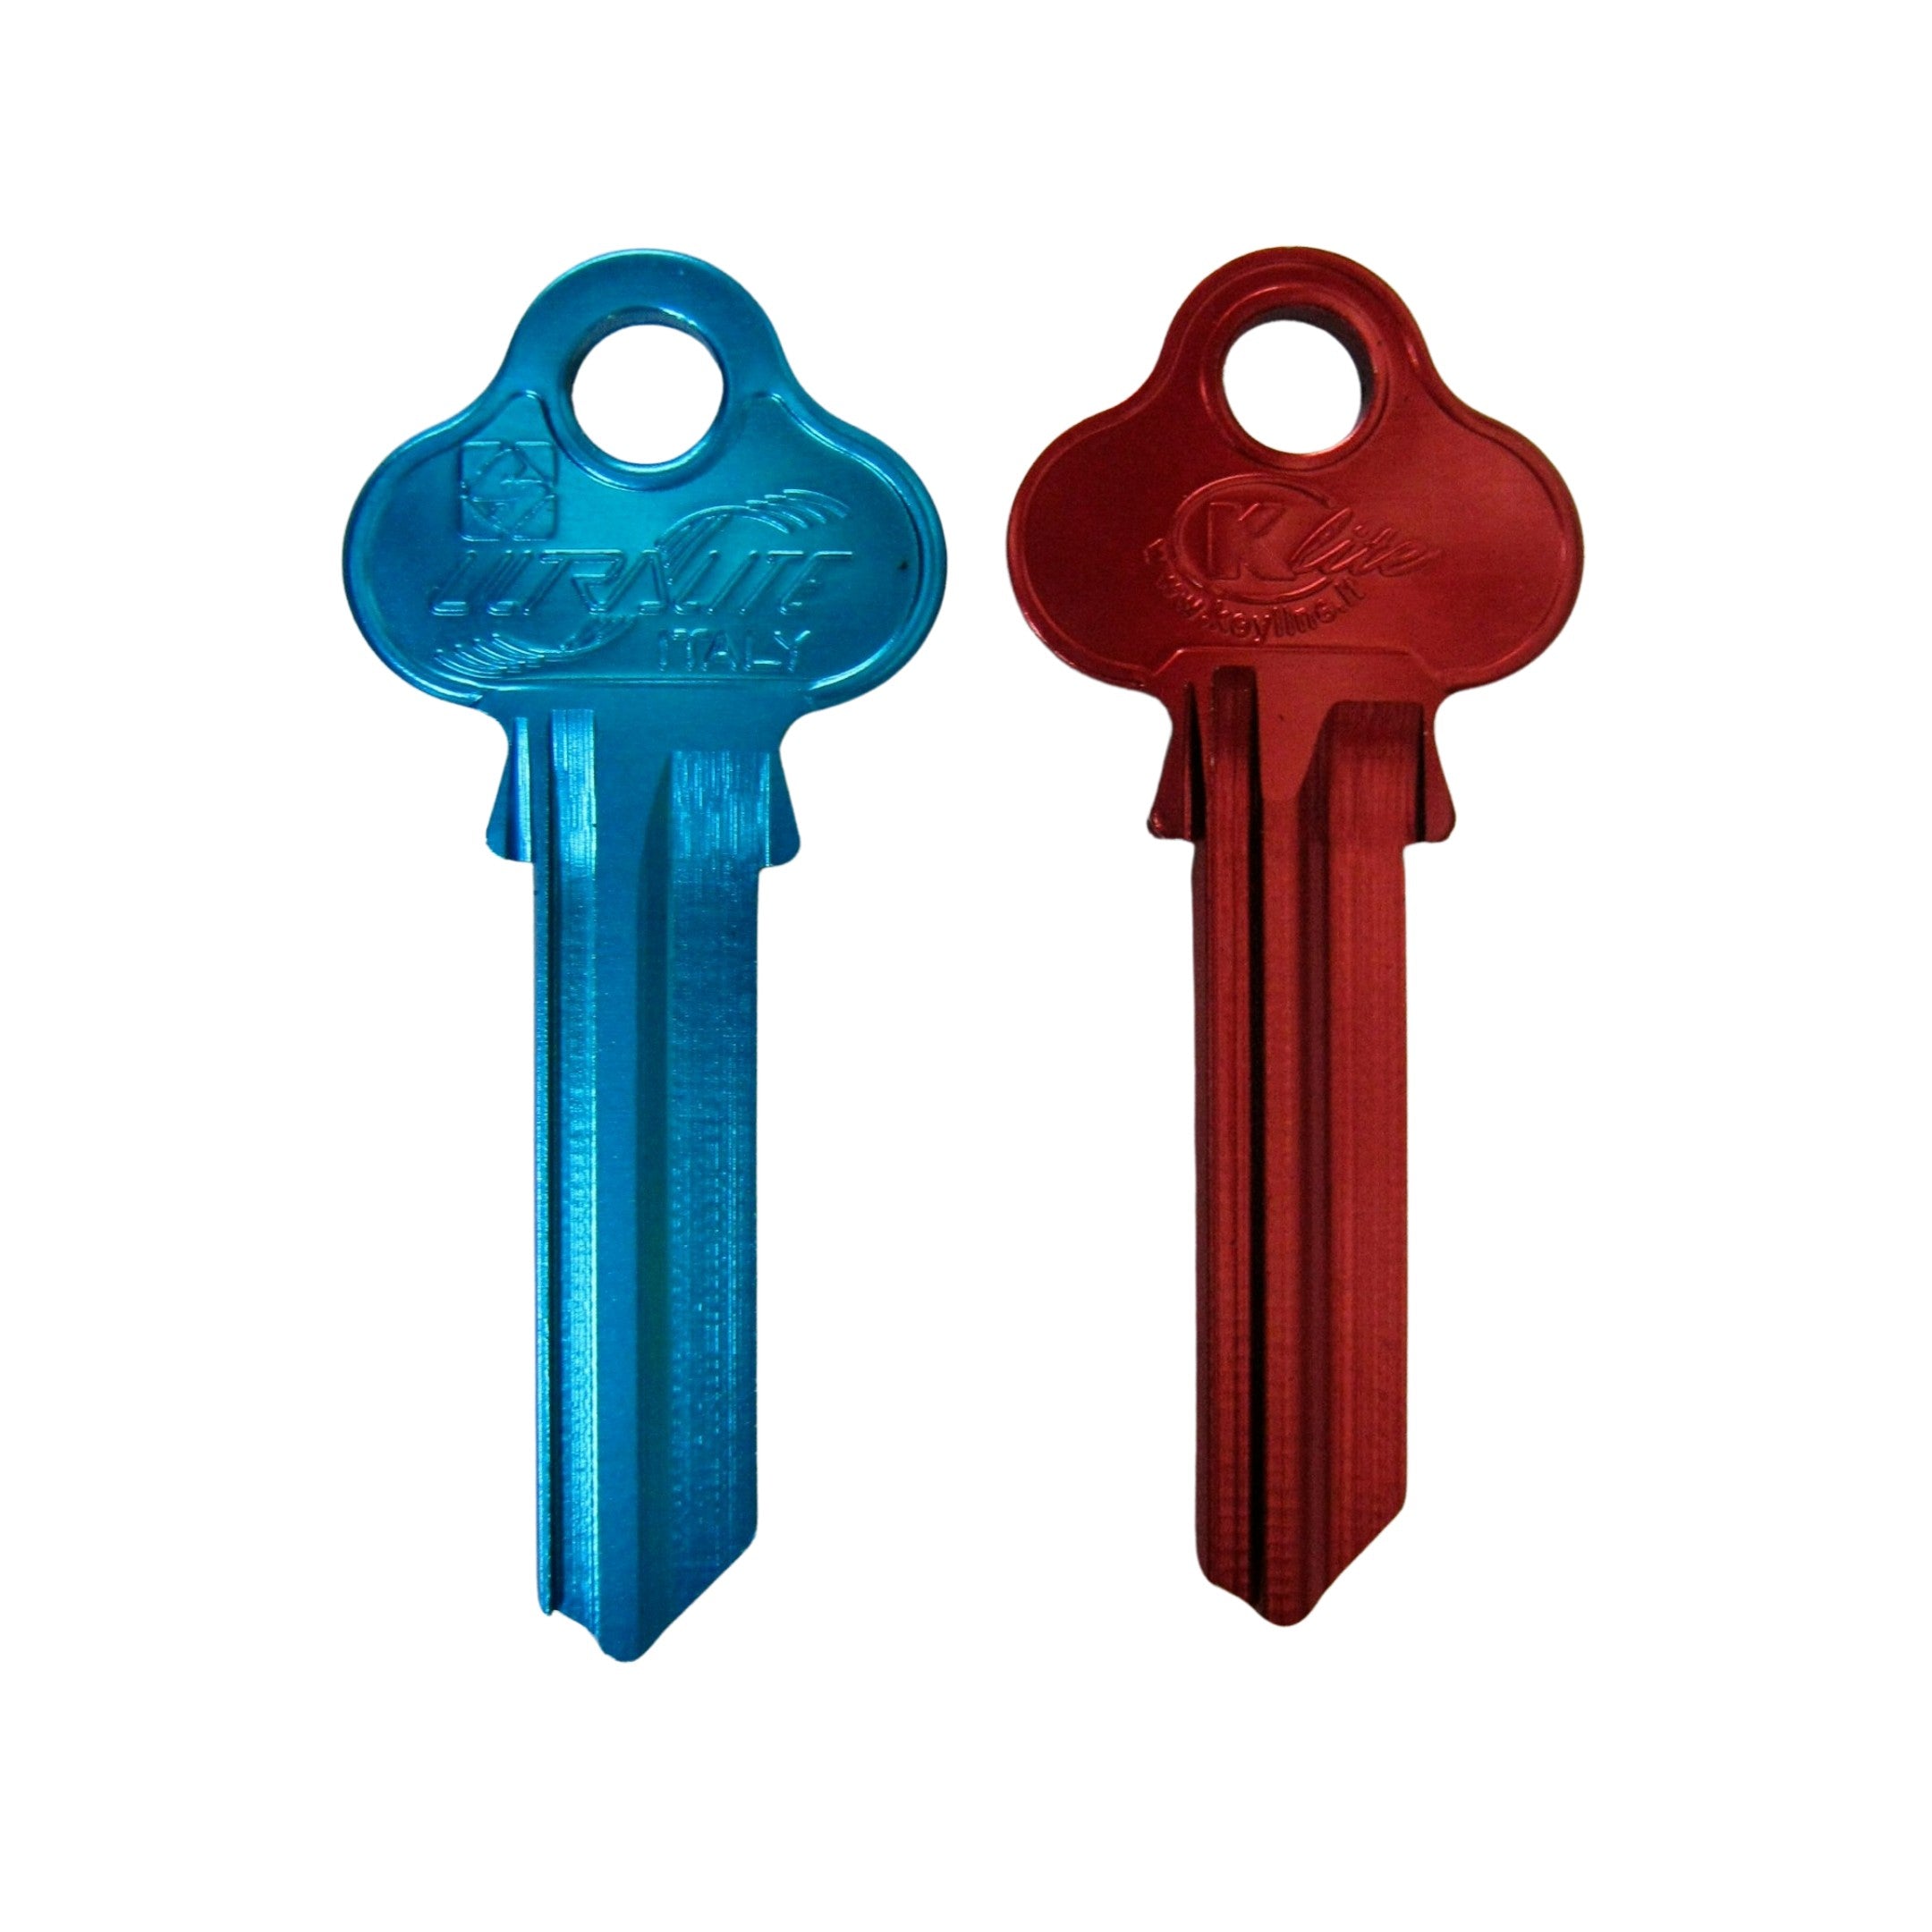 coloured-blank-house-key-ready-for-making-copies